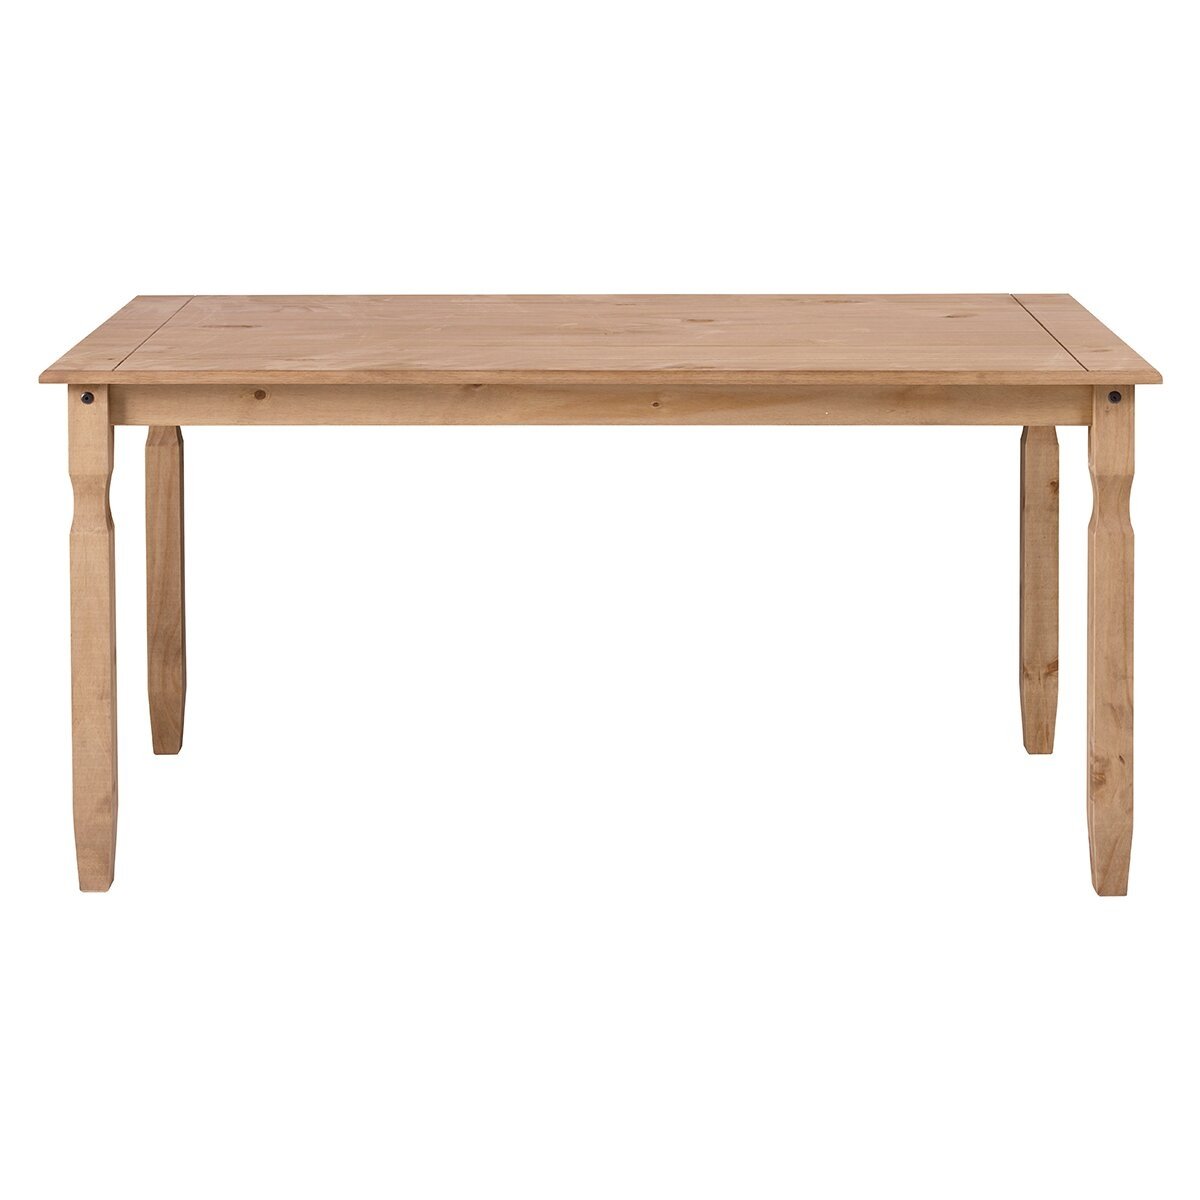 Nolea Pine Solid Wood Dining Table - Image 1